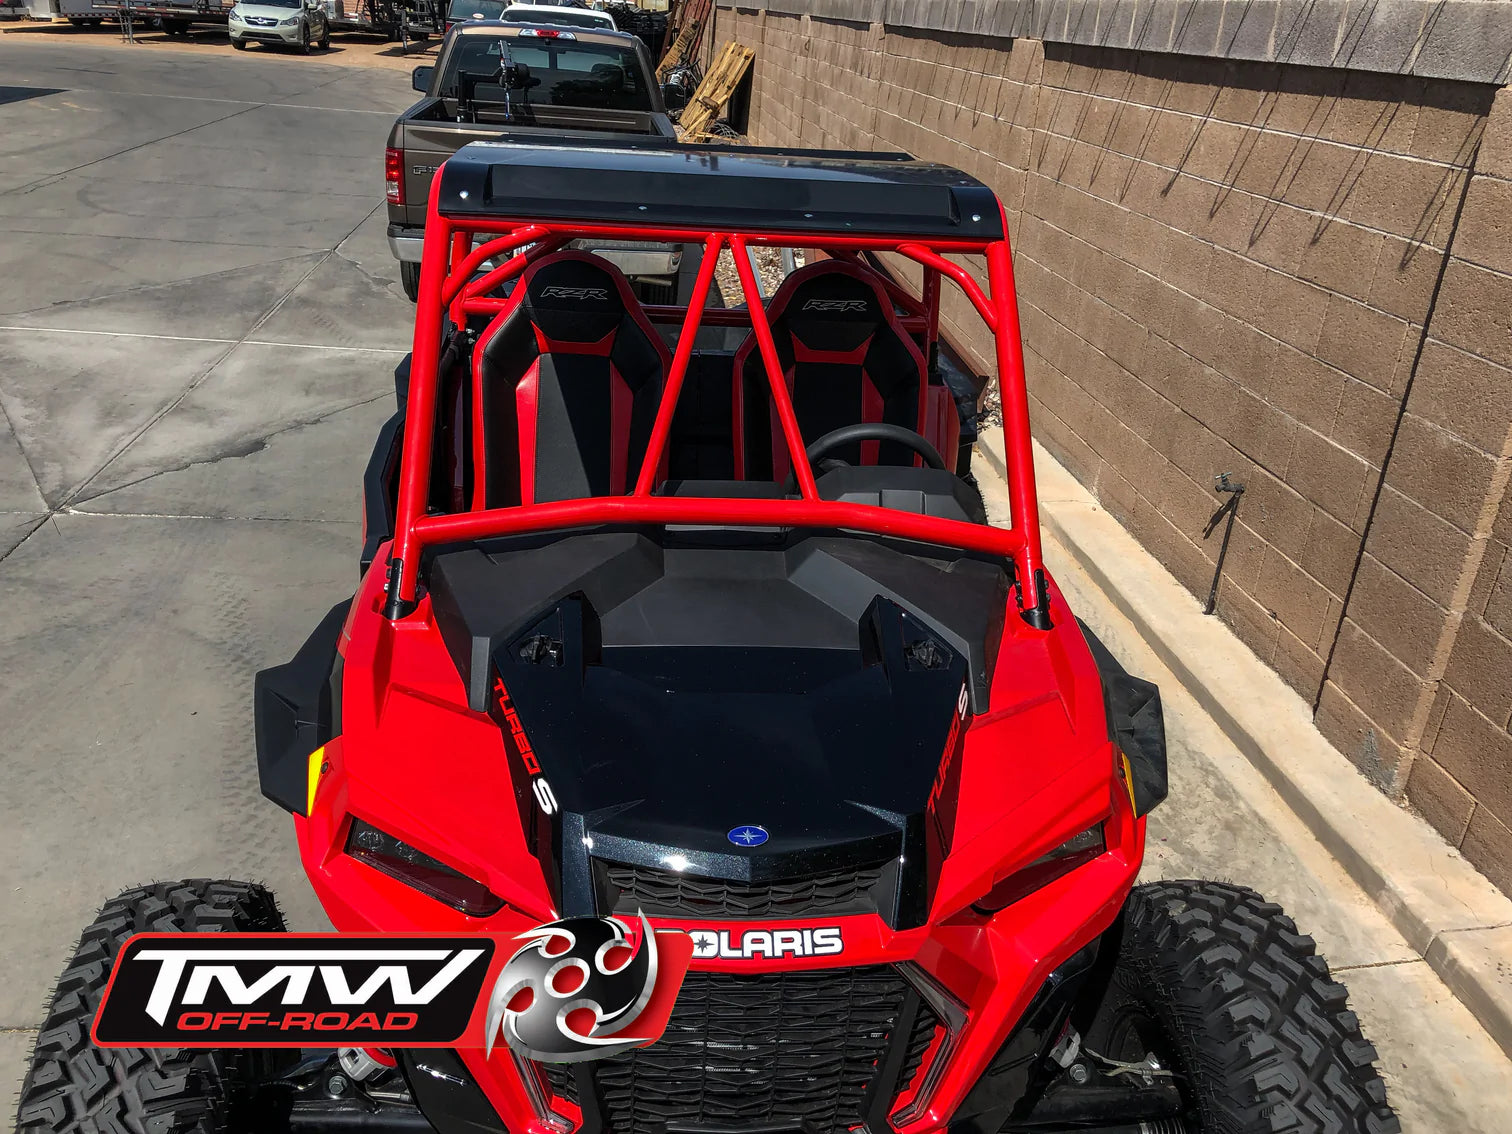 TMW Sand Slayer speed style 2 Seat Cage (fits 2019 Turbo S and 2019 RZR models) - G Life UTV Shop Parts